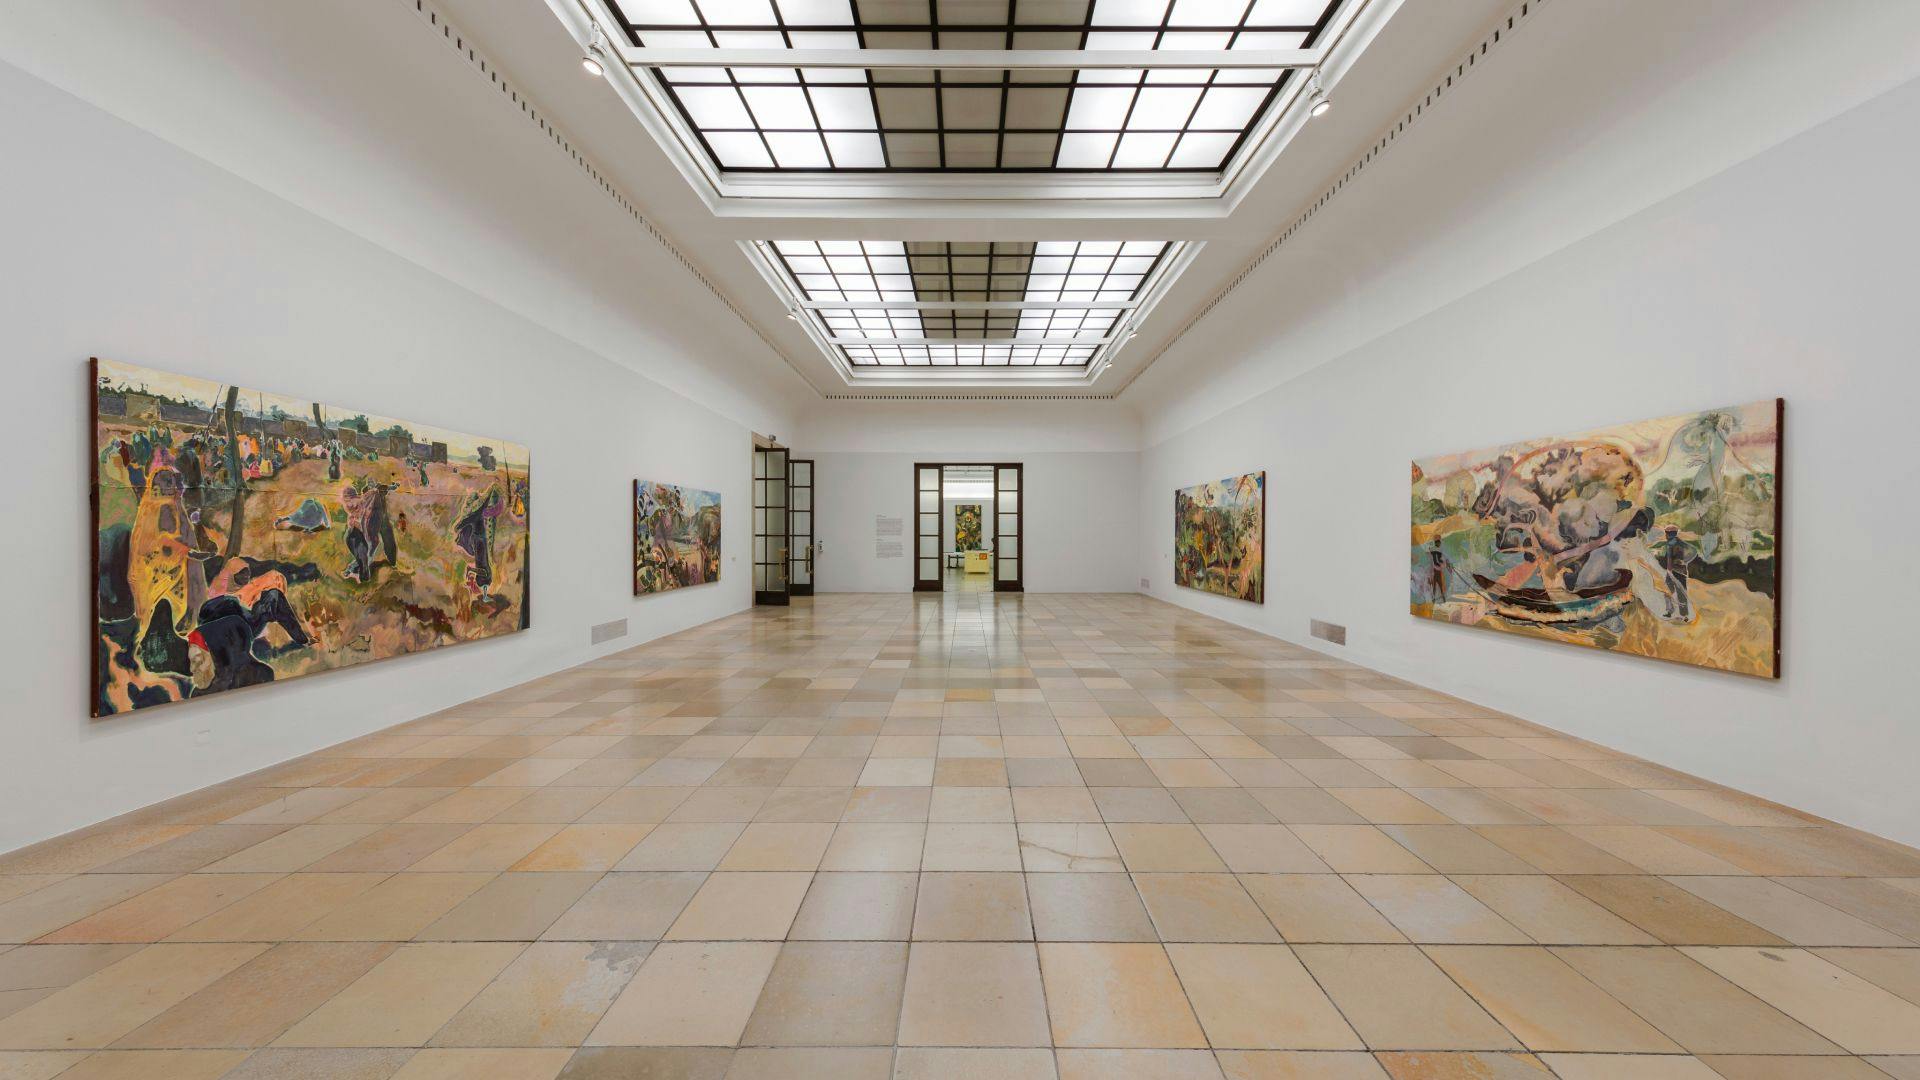 Installation view of the exhibition, Michael Armitage: Paradise Edict, at Haus der Kunst in Munich, dated 2020.